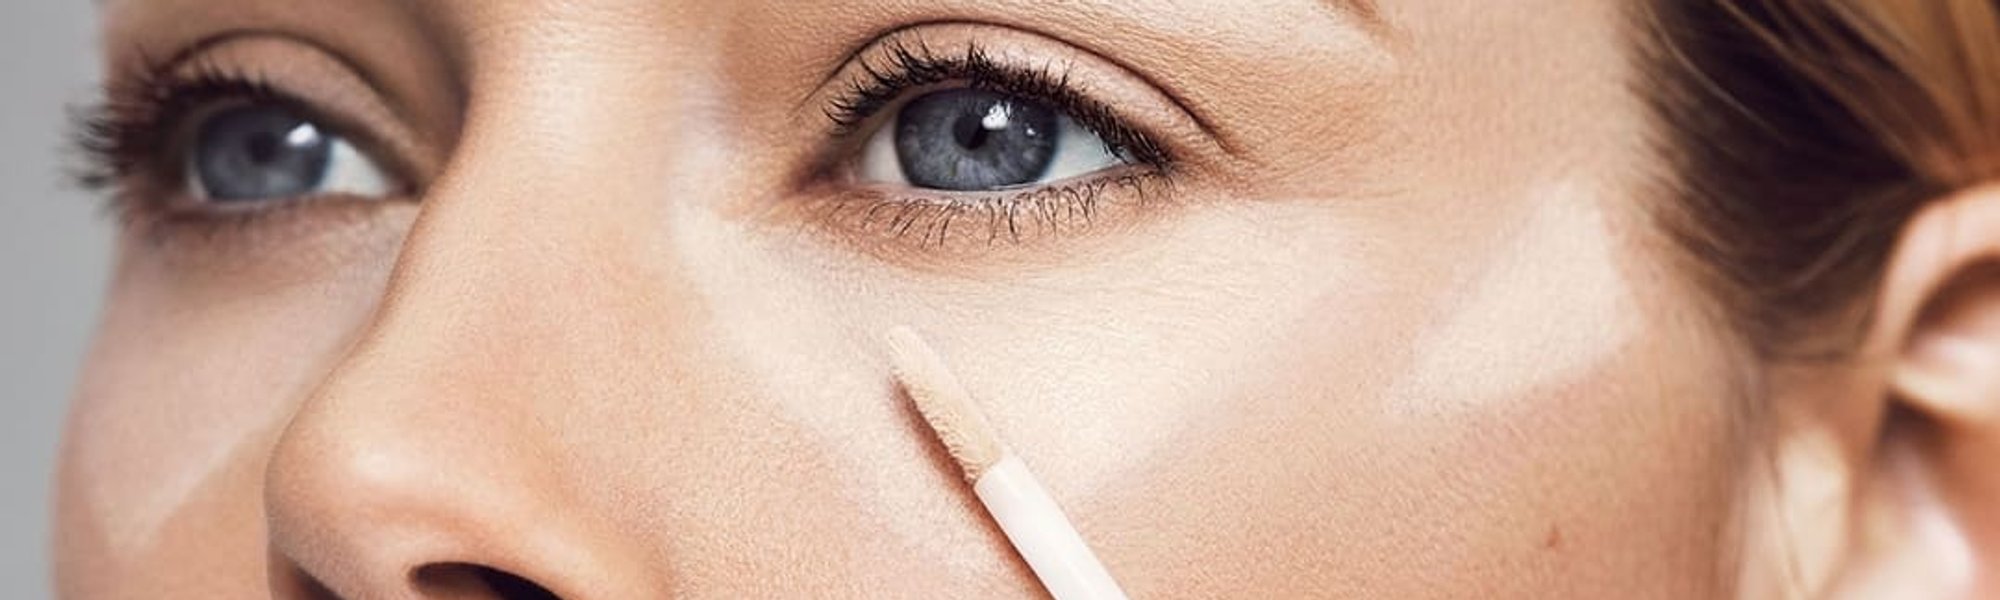 How to Pick the Right Concealer for Your Skin Tone - L'Oréal Paris